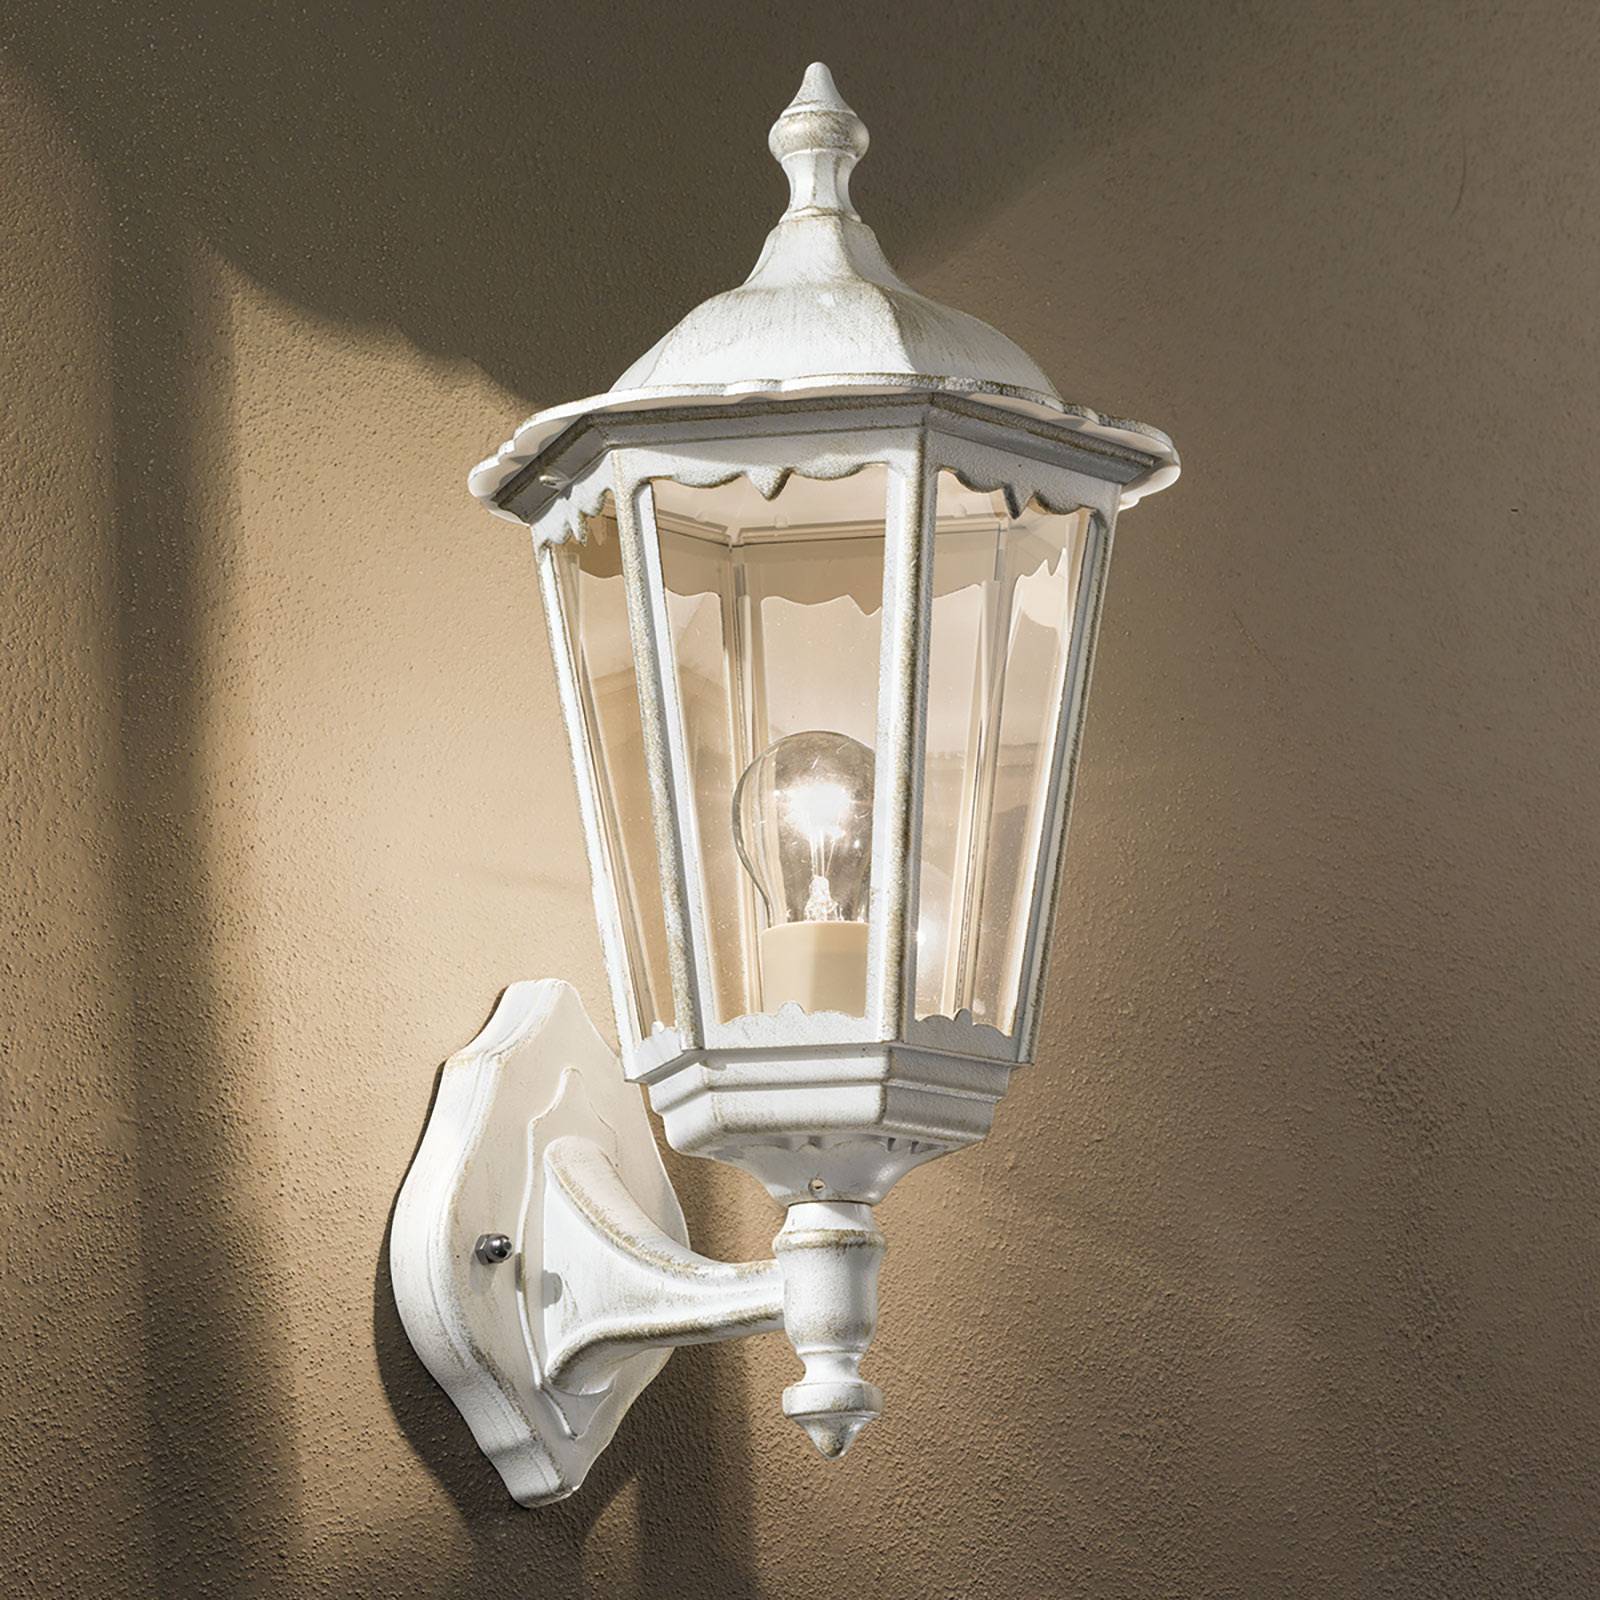 Puchberg outdoor wall light in white and gold